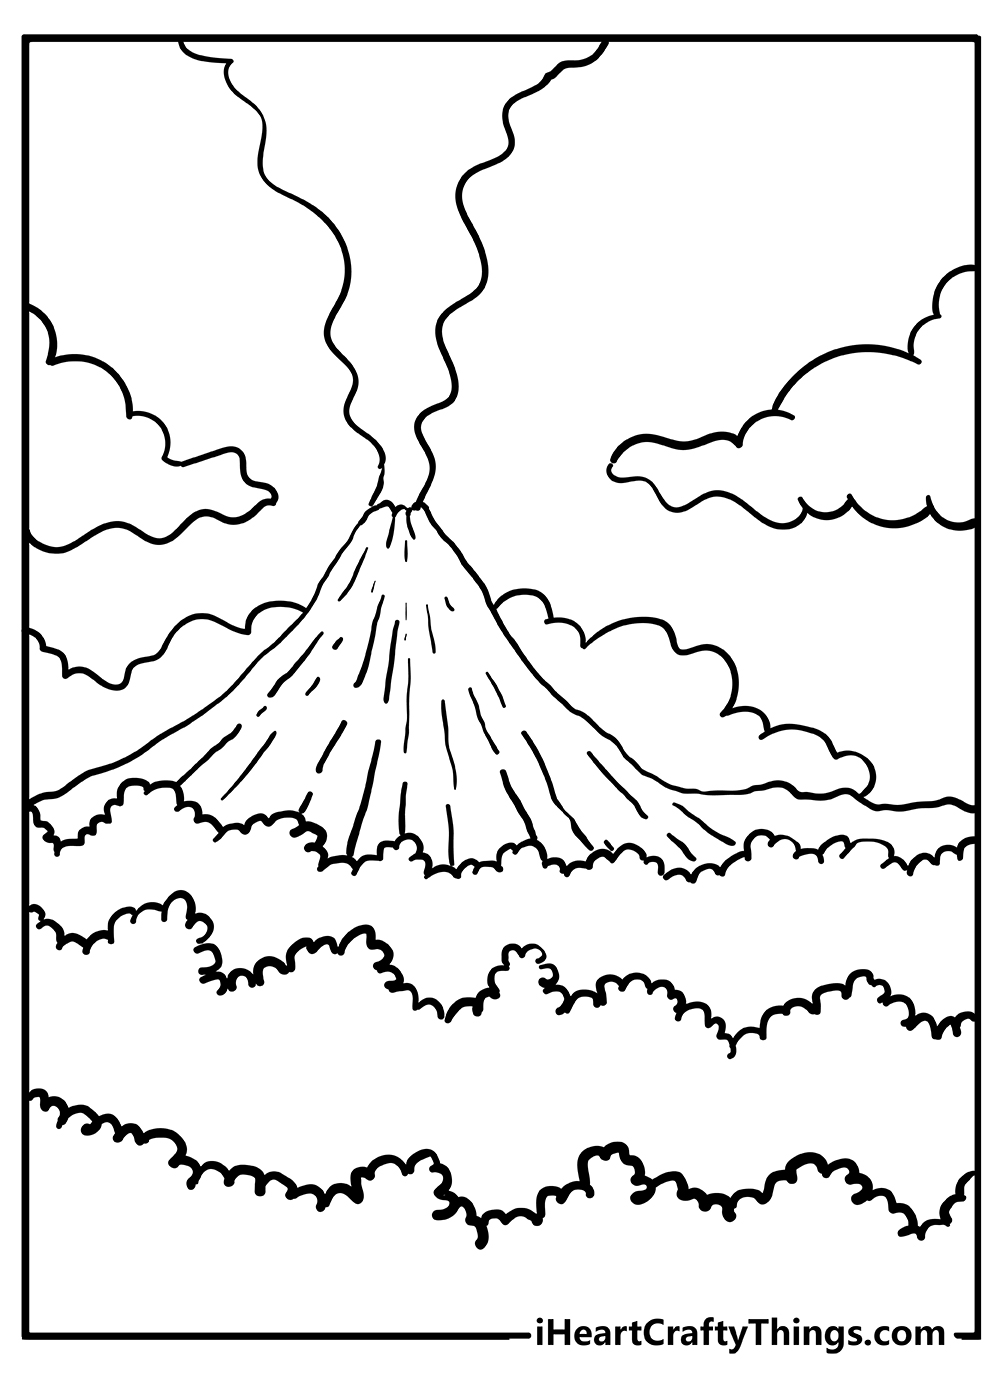 Volcano coloring pages free printables